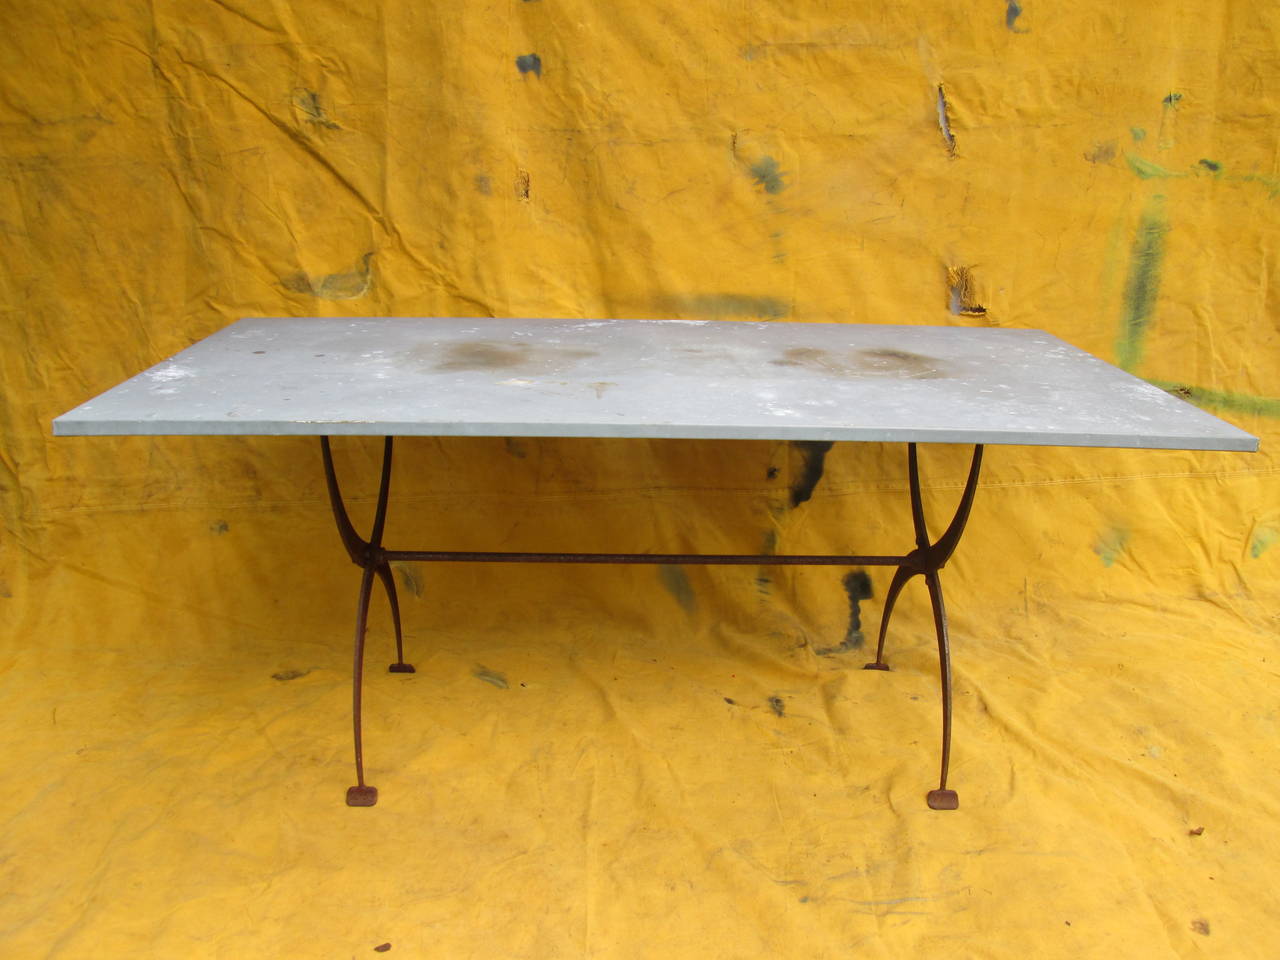 Iron base French table base. Zinc-wrapped top. Note: slightly taller than average dining height.